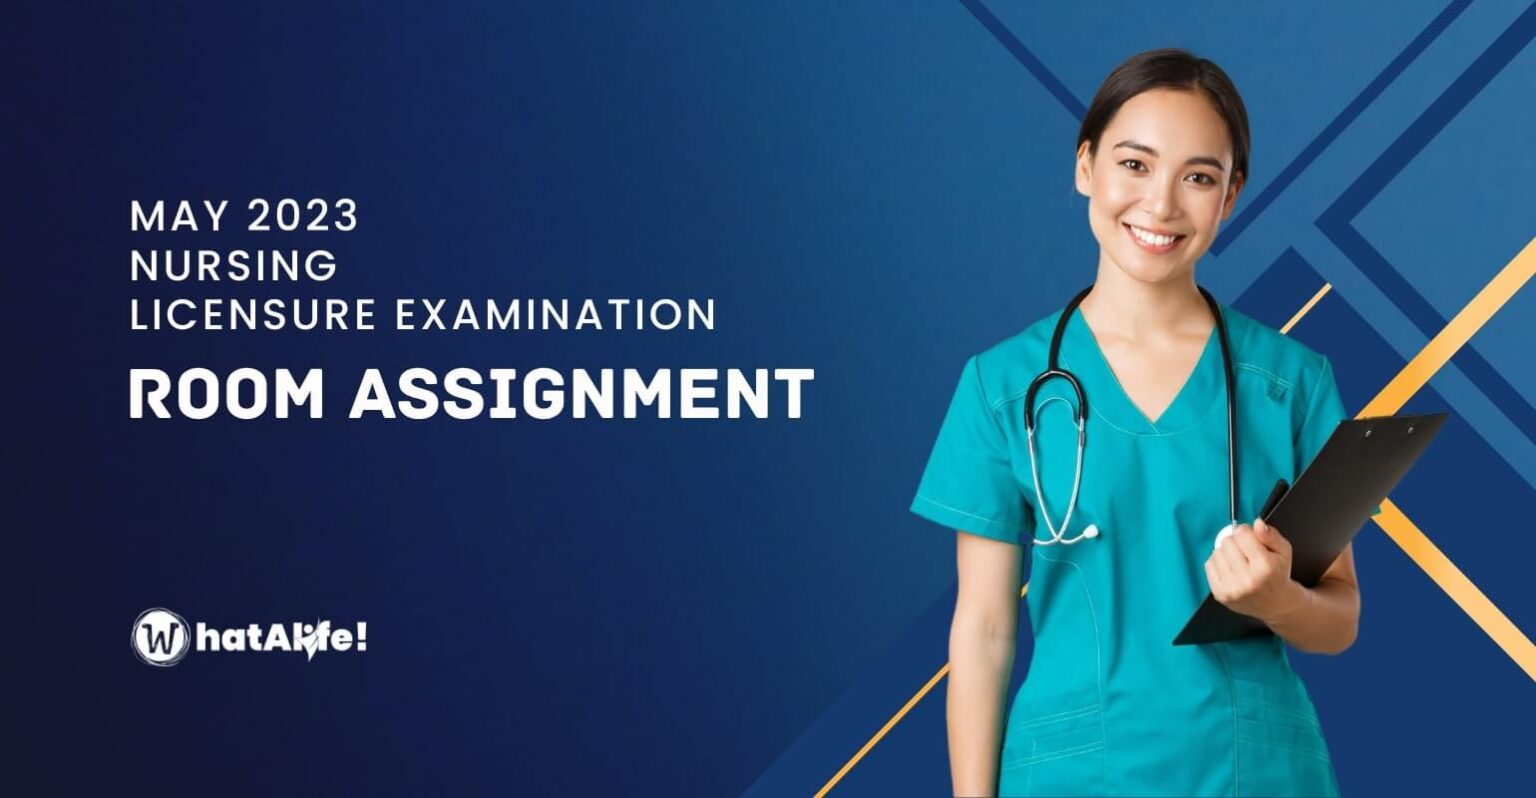 prc room assignment nursing may 2023